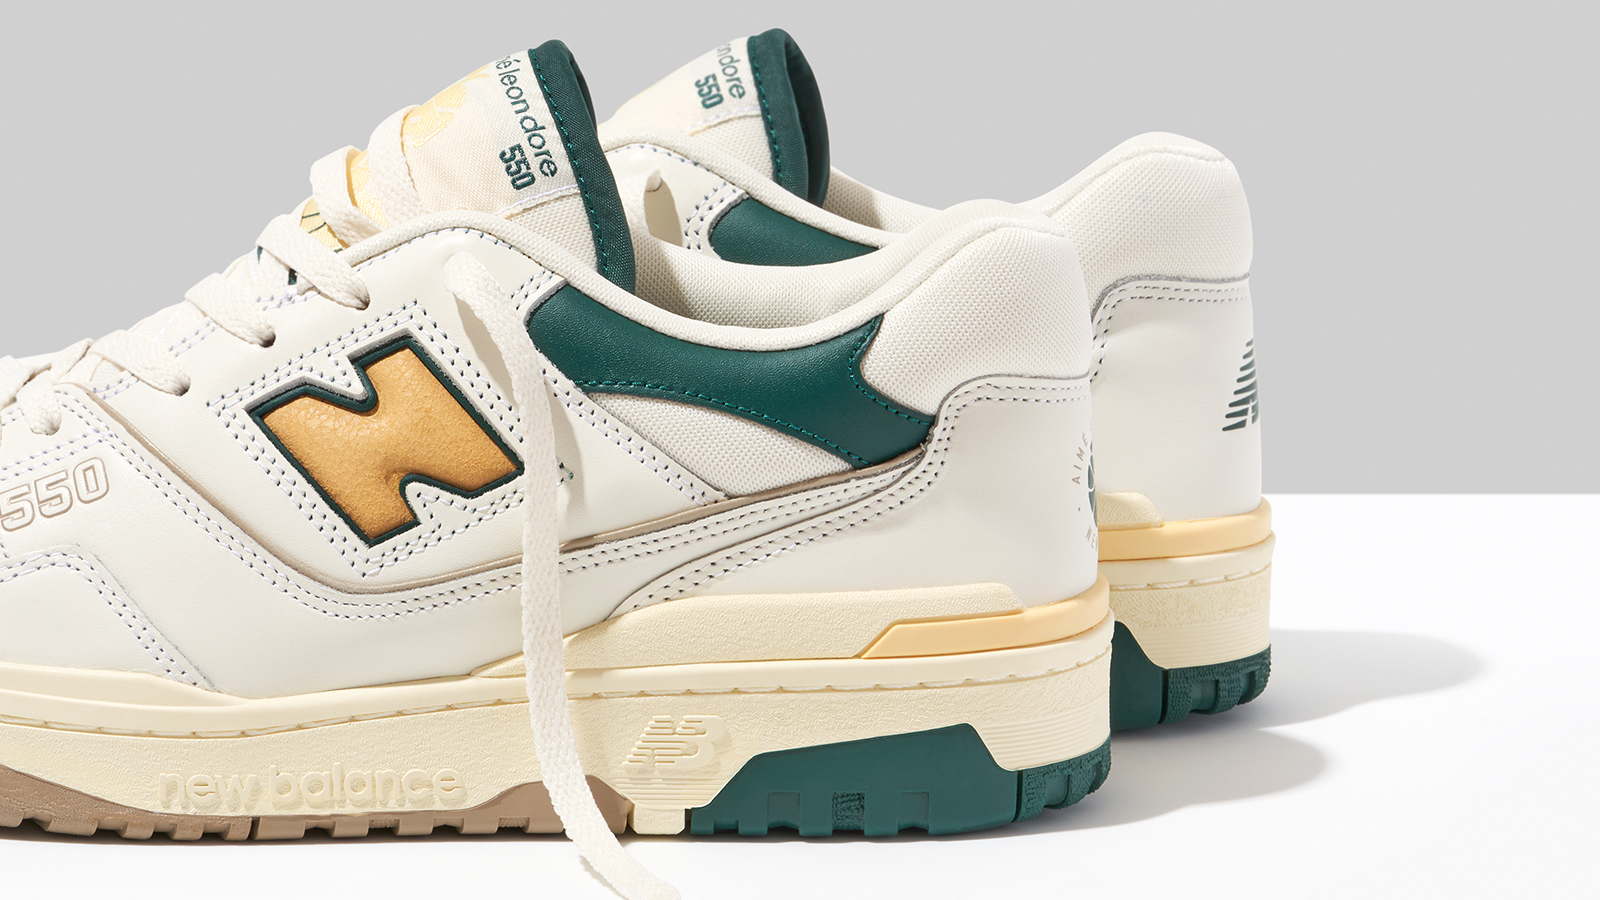 How To Style The New Balance 550